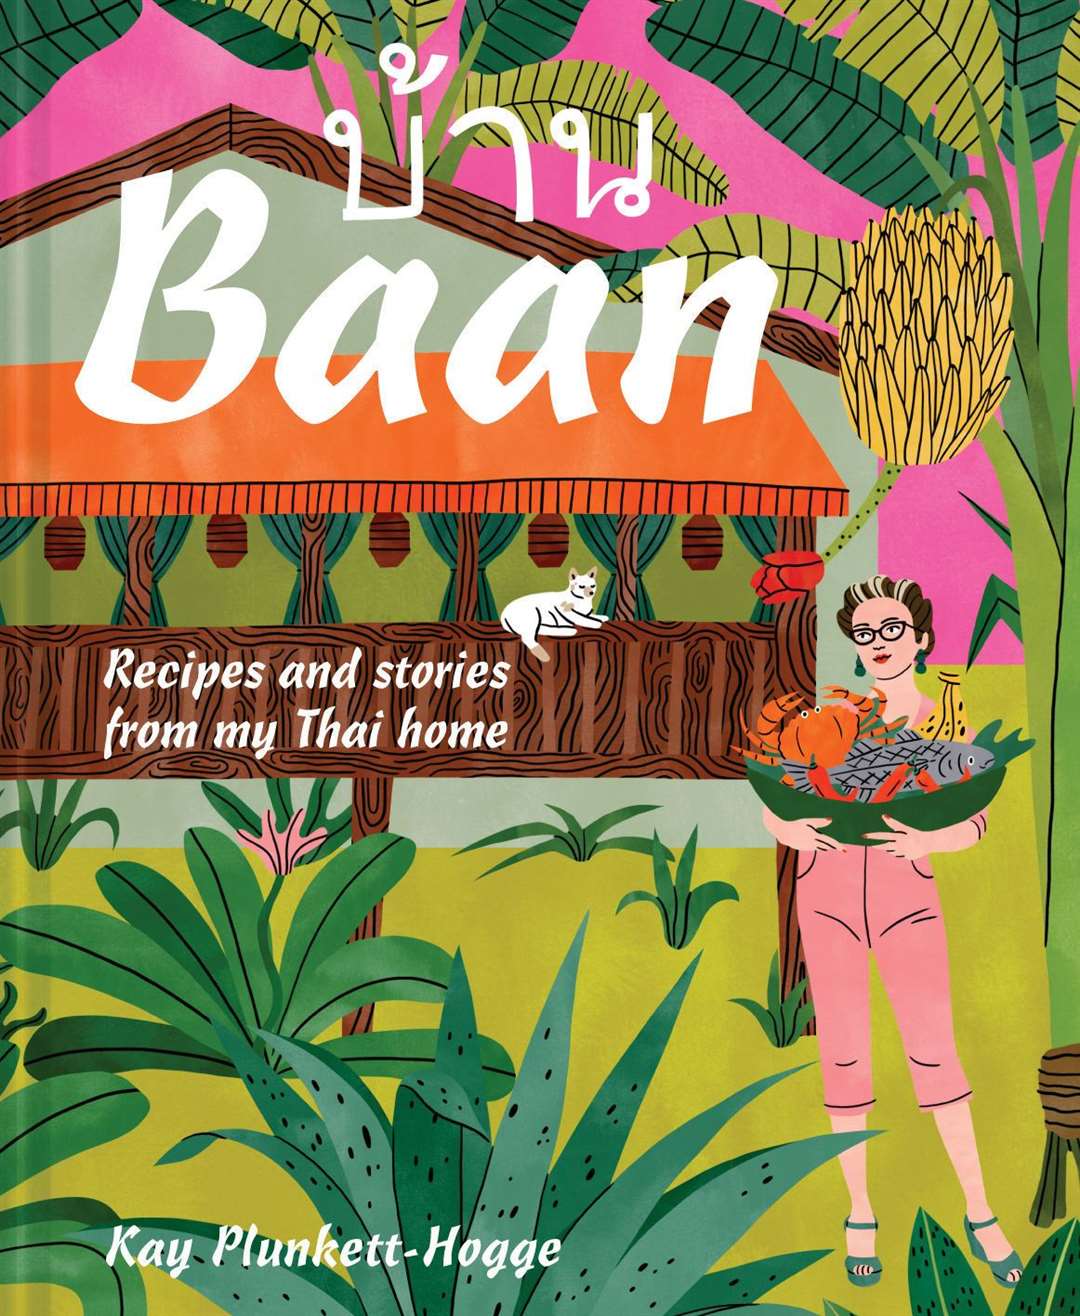 Baan: Recipes and stories from my Thai home by Kay Plunkett-Hogge. Photo: Louise Hagger/PA